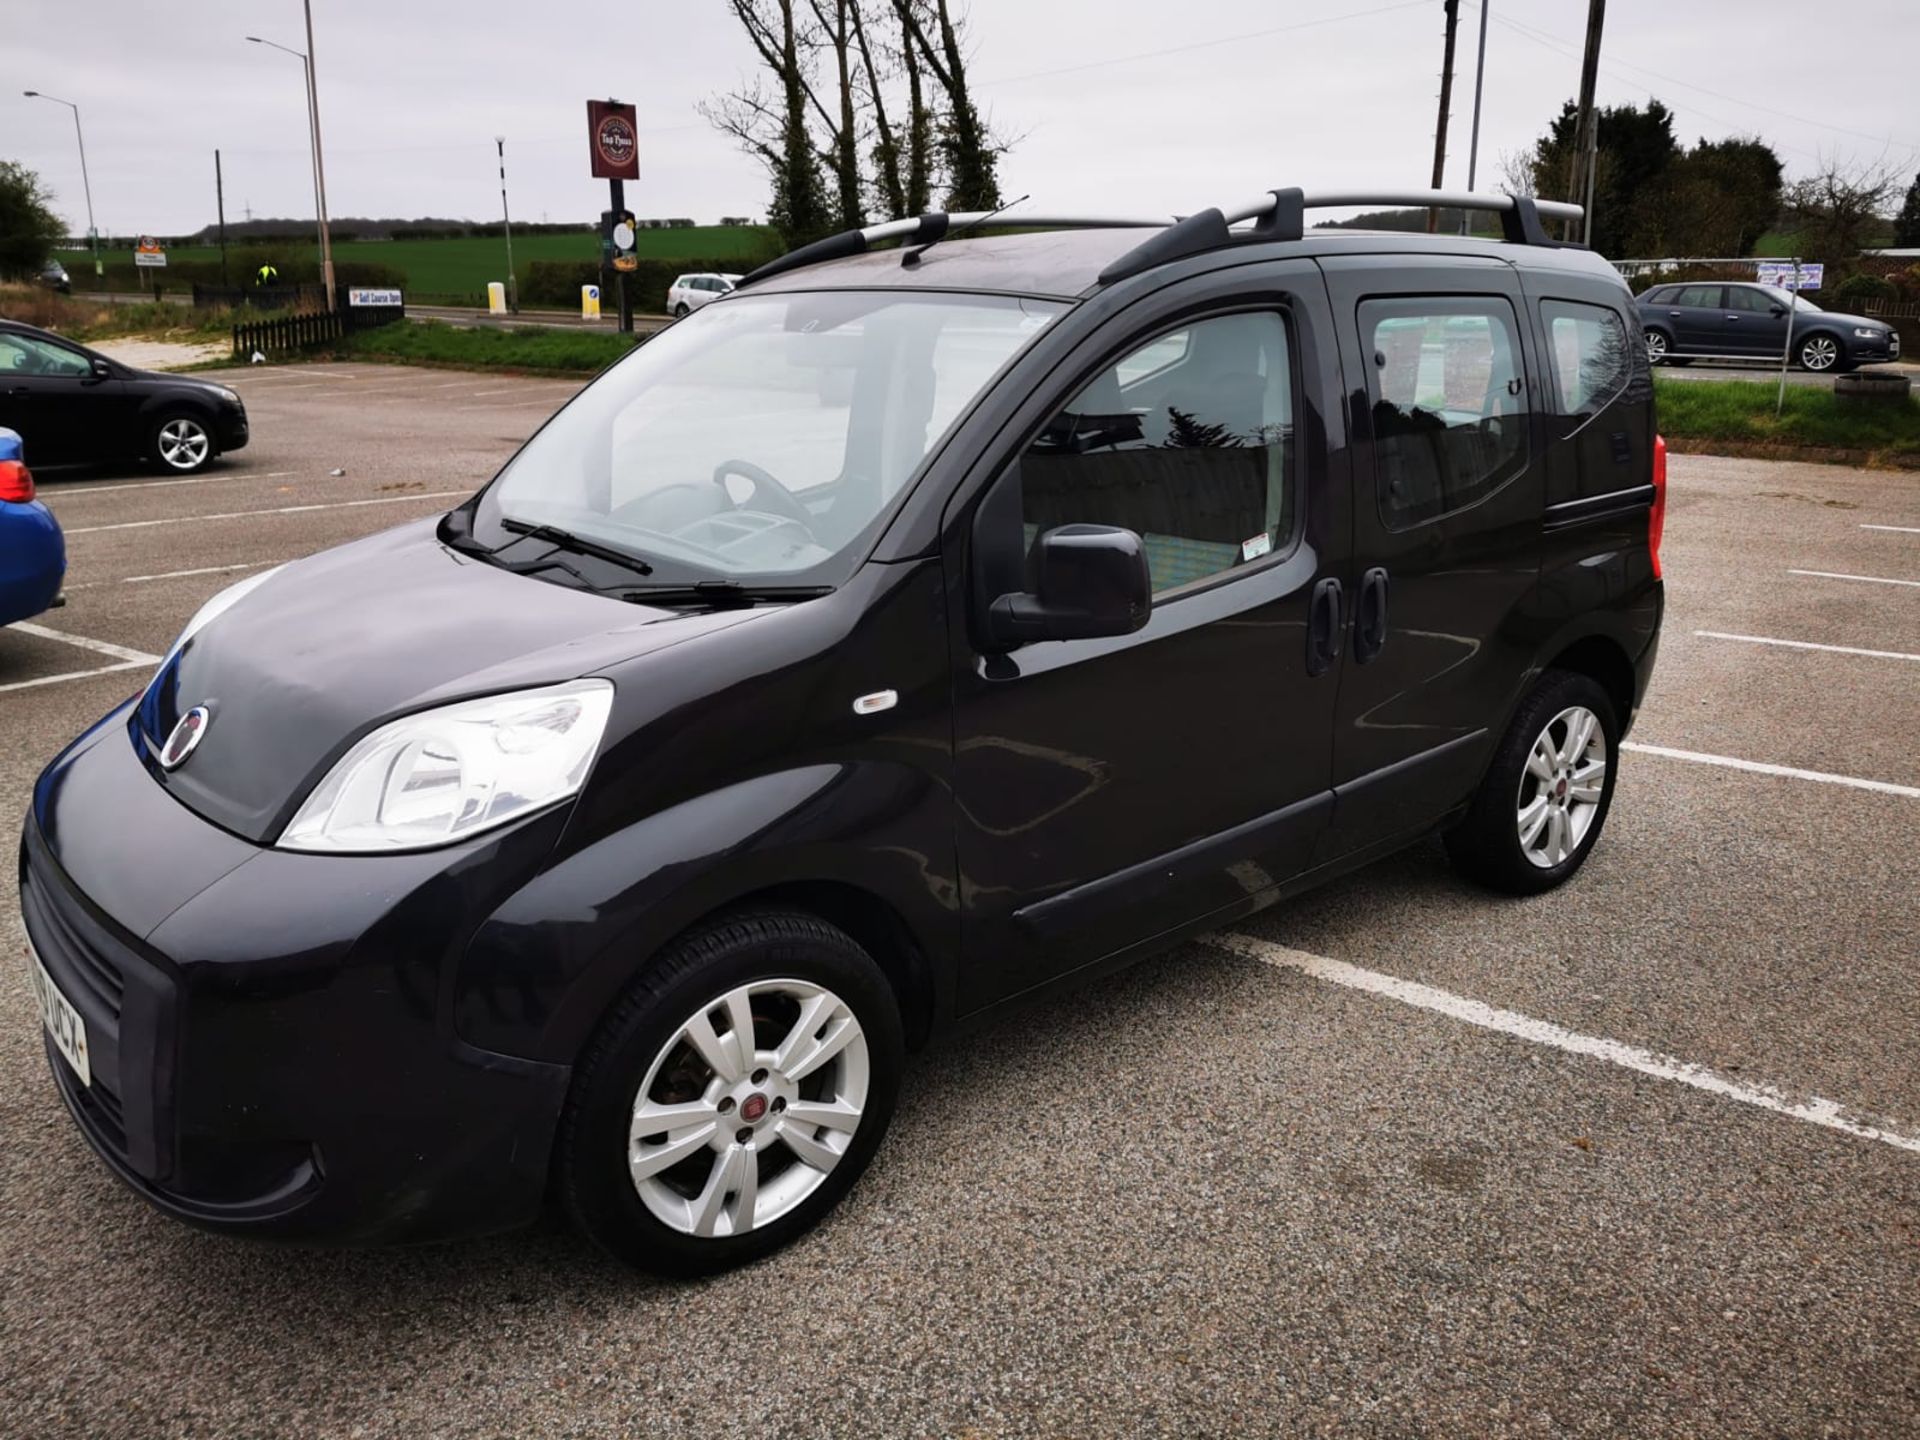 2009 FIAT QUBO DYNAMIN MULTIJET MPV, DIESEL ENGINE, SHOWING 0 PREVIOUS KEEPERS *NO VAT* - Image 5 of 27